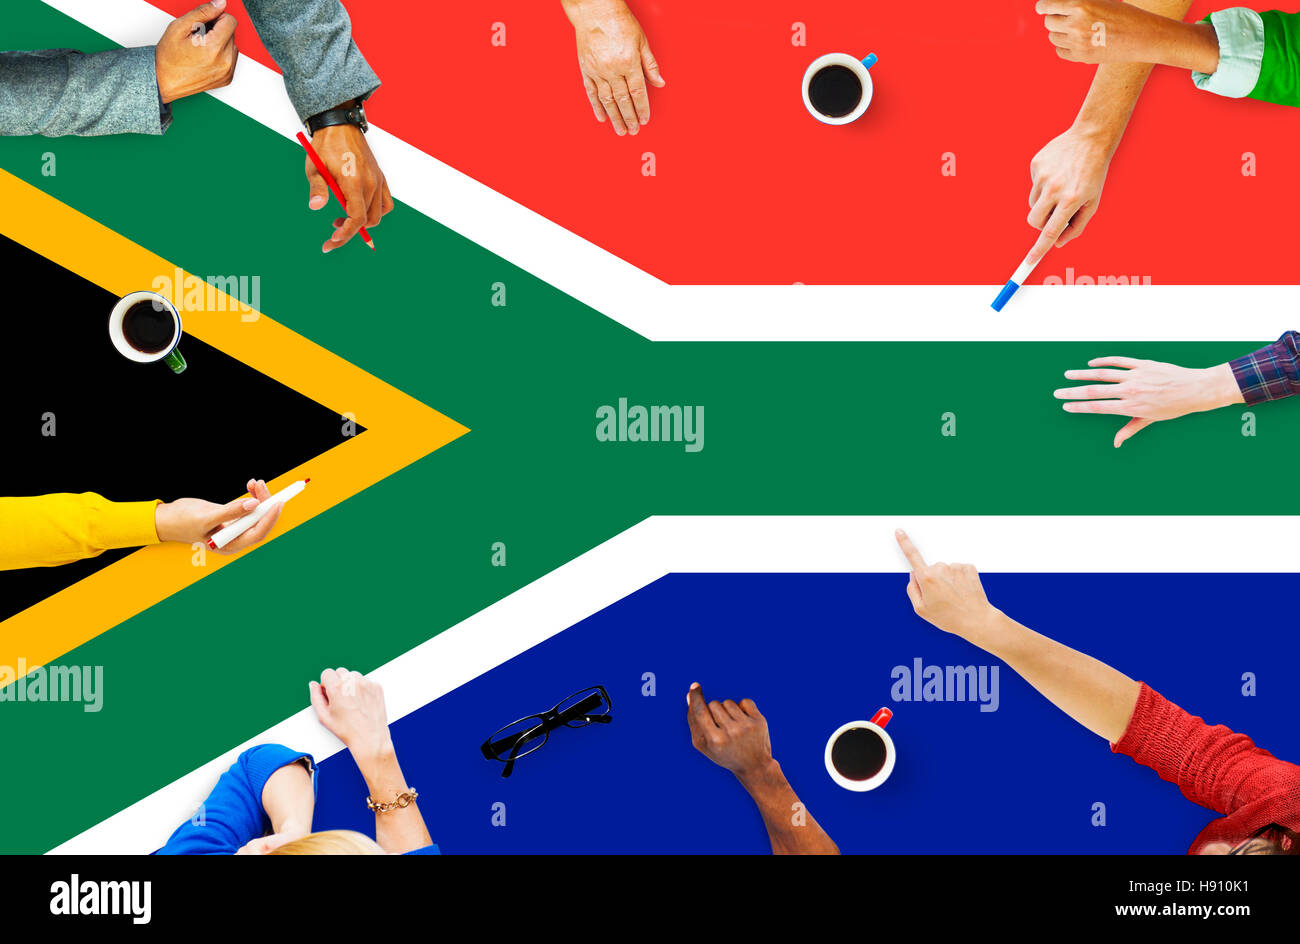 South Africa Flag Patriotism South African Pride Unity Concept Stock Photo